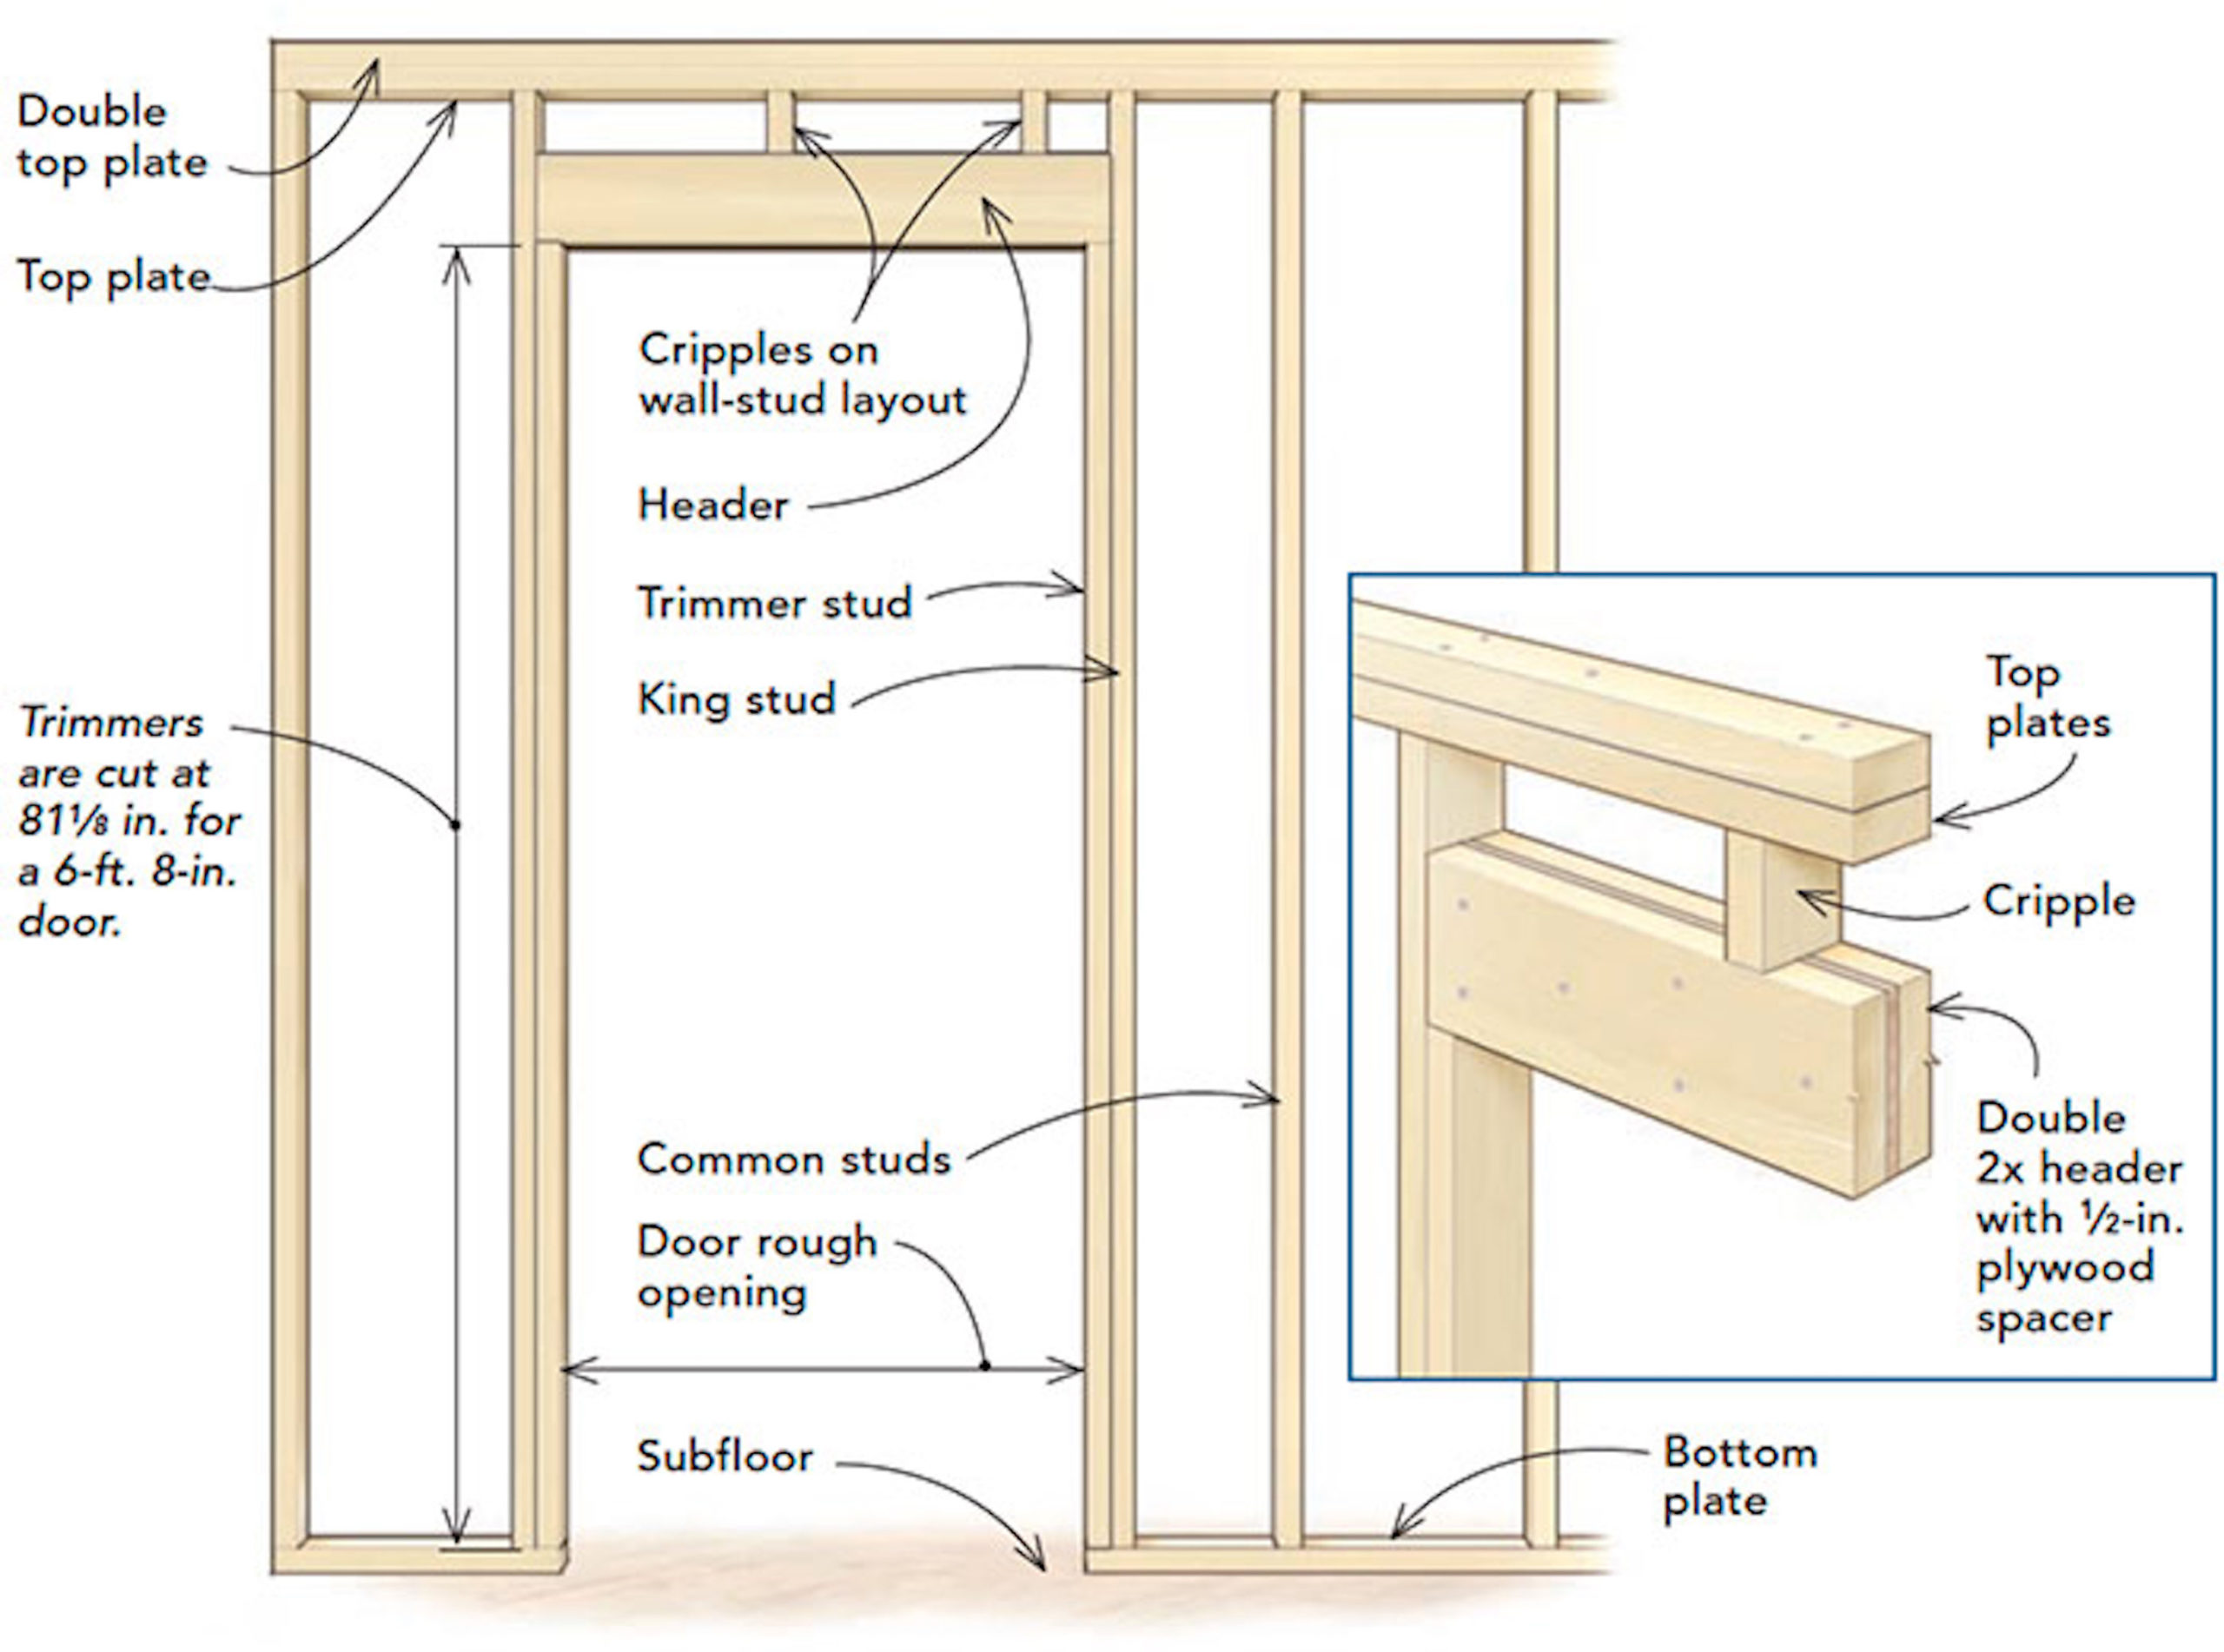 How to size and rough frame a door opening. 